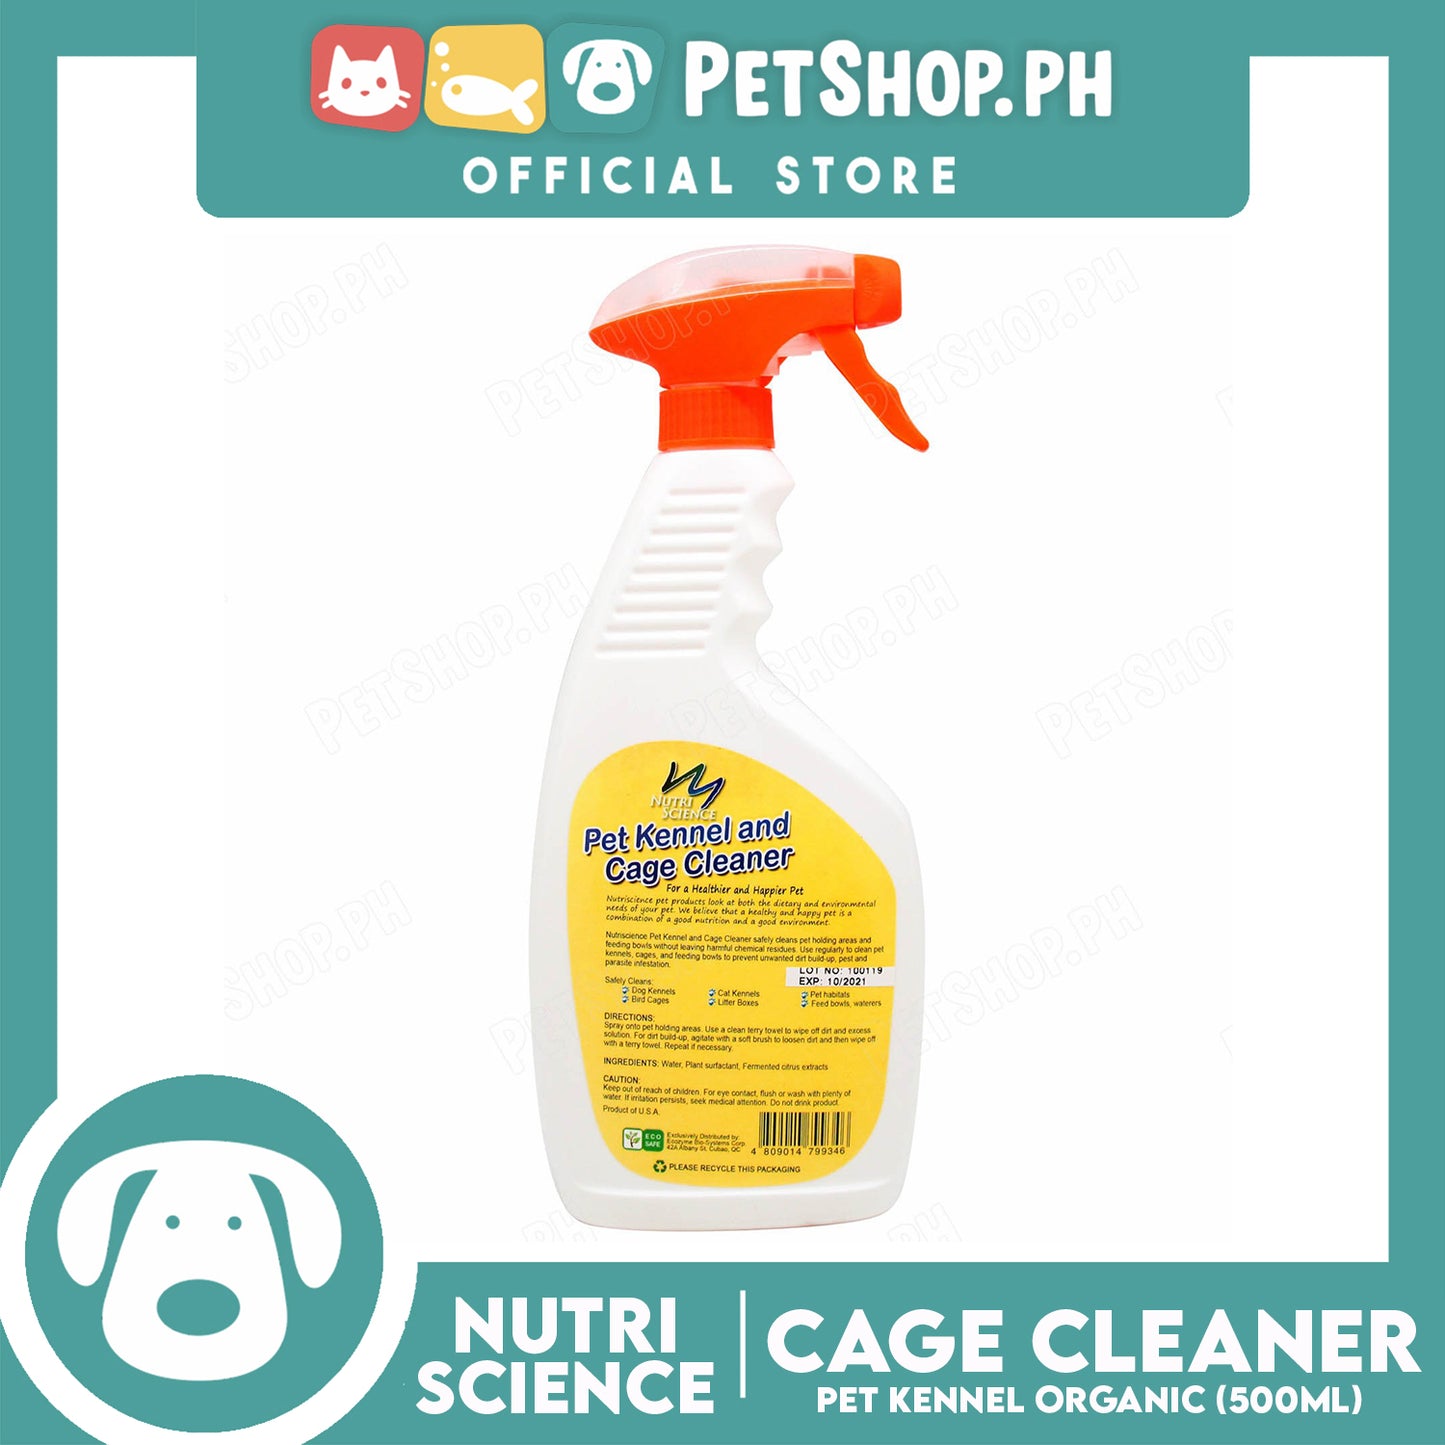 Nutri Science Pet Kennel and Cage Cleaner 500ml